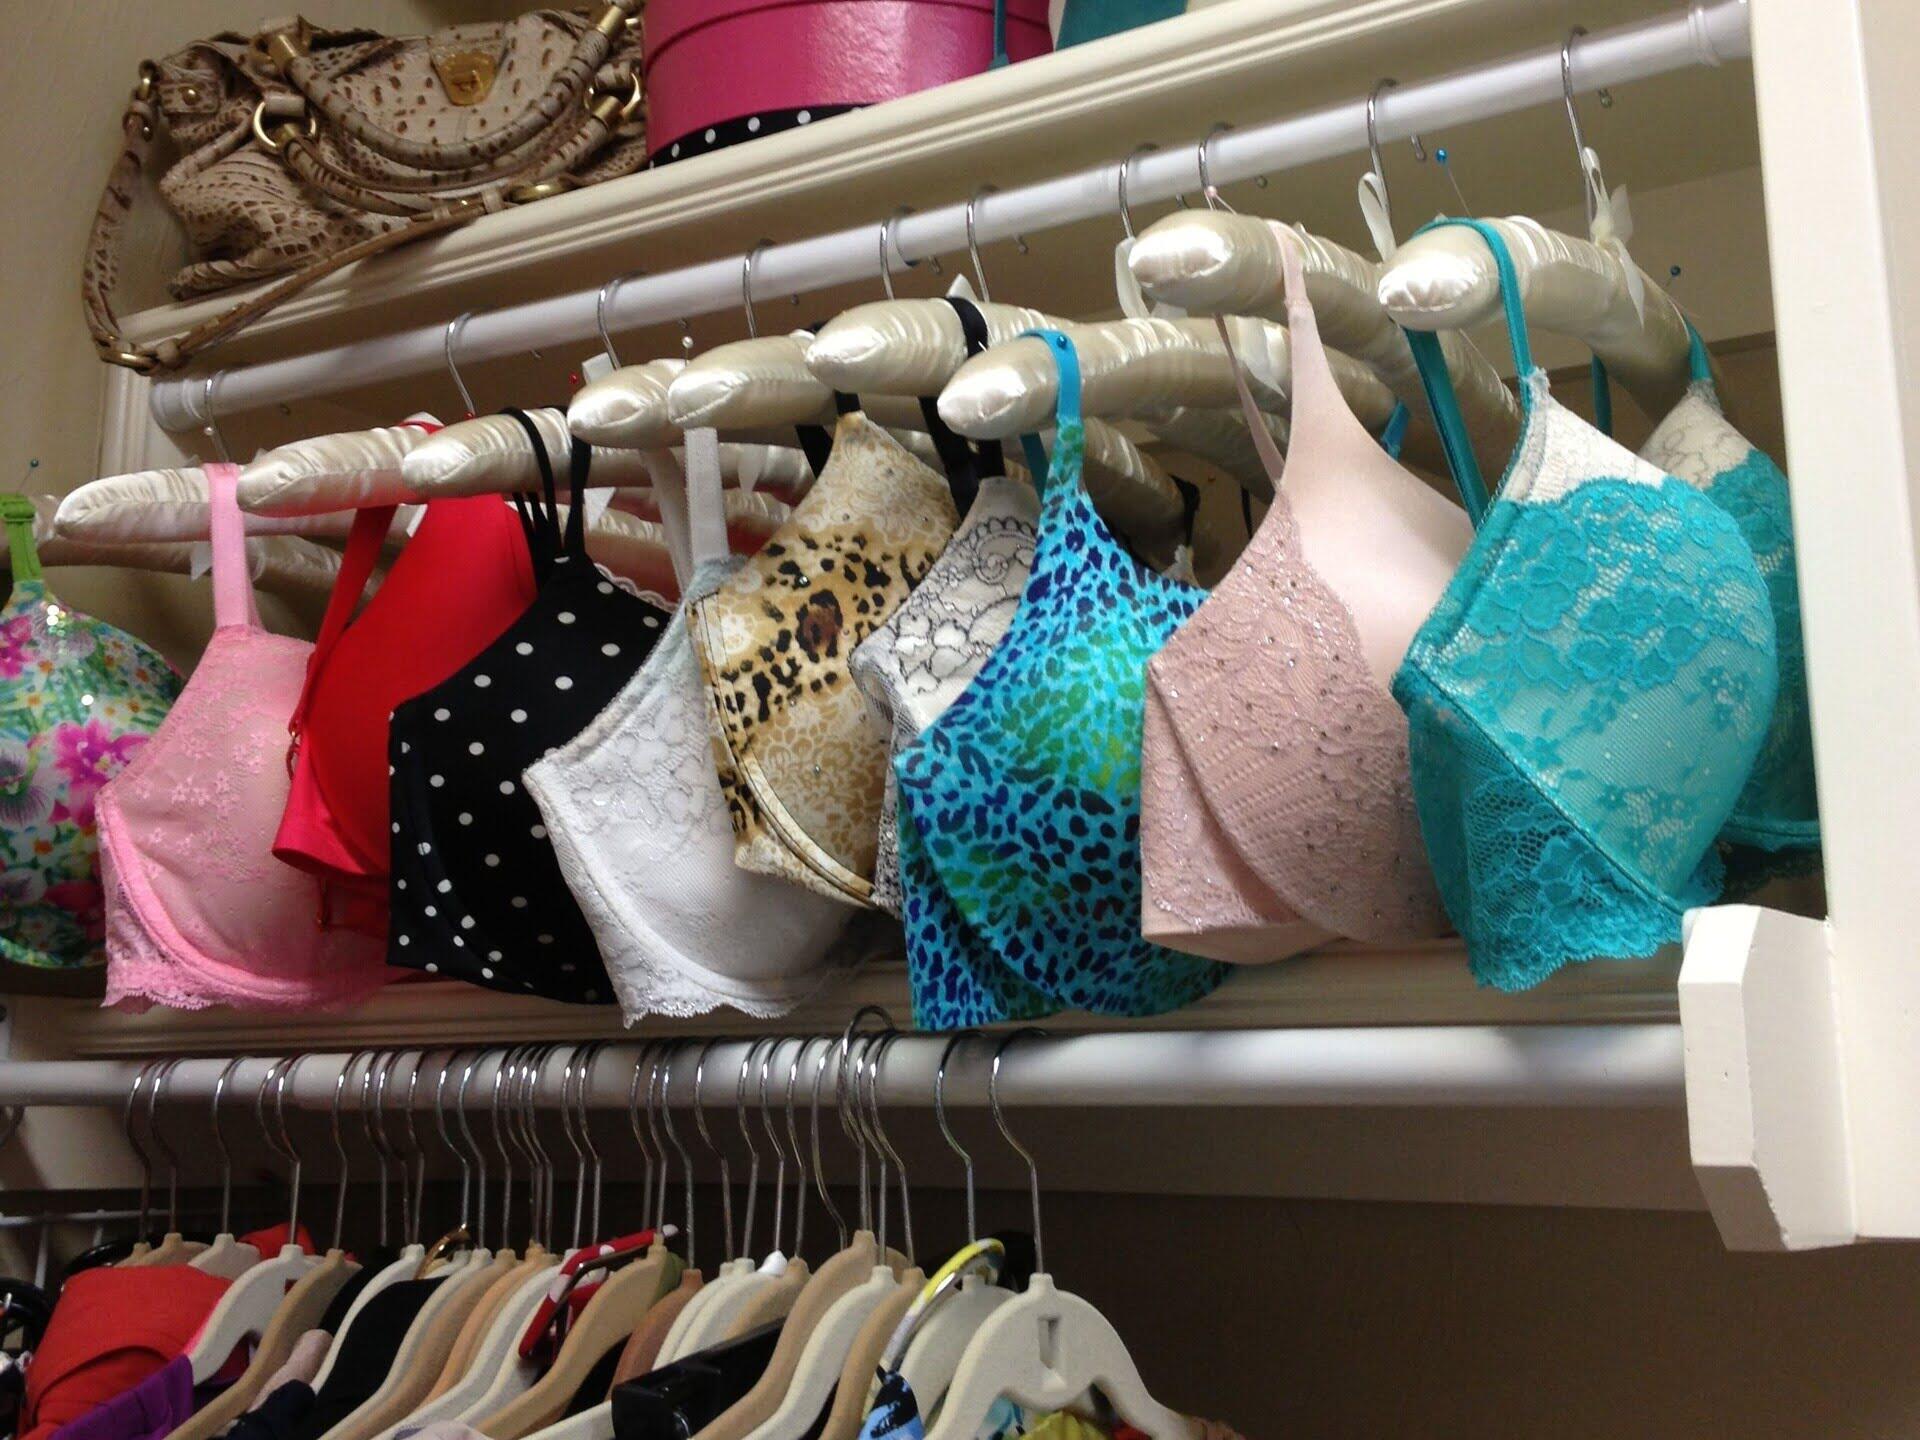 How To Store Bras In Closet